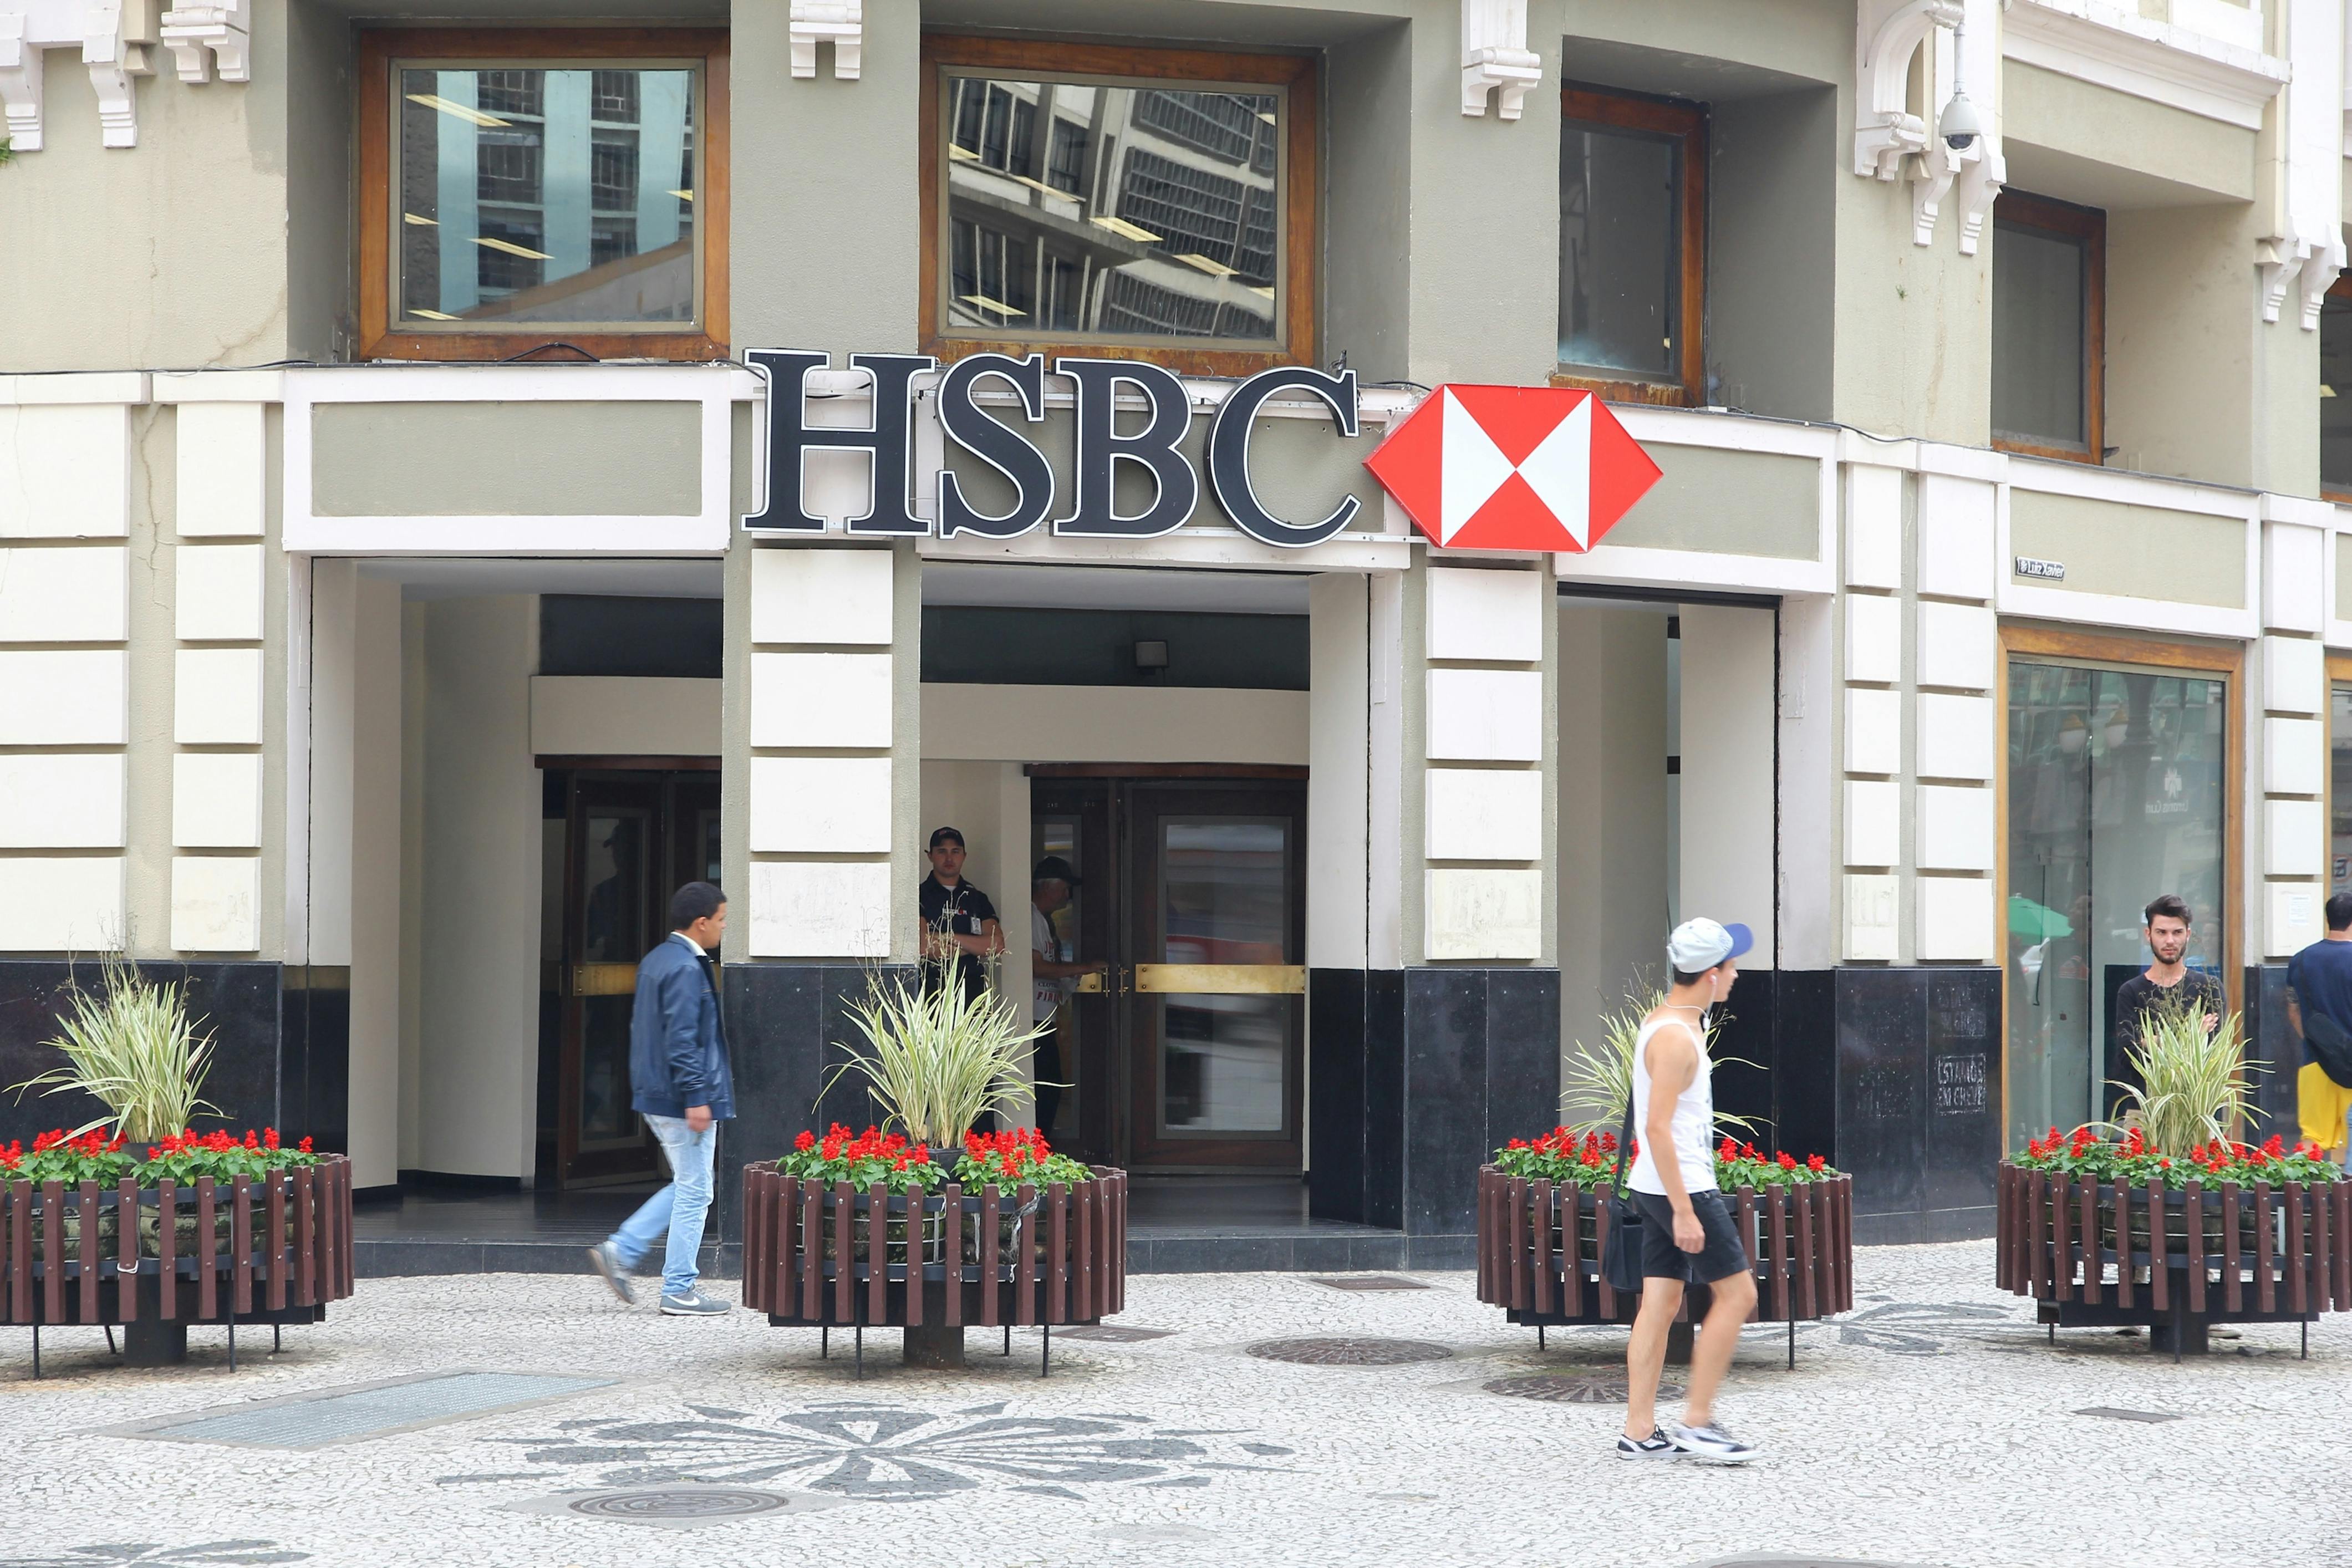 HSBC bank store front with people waking by